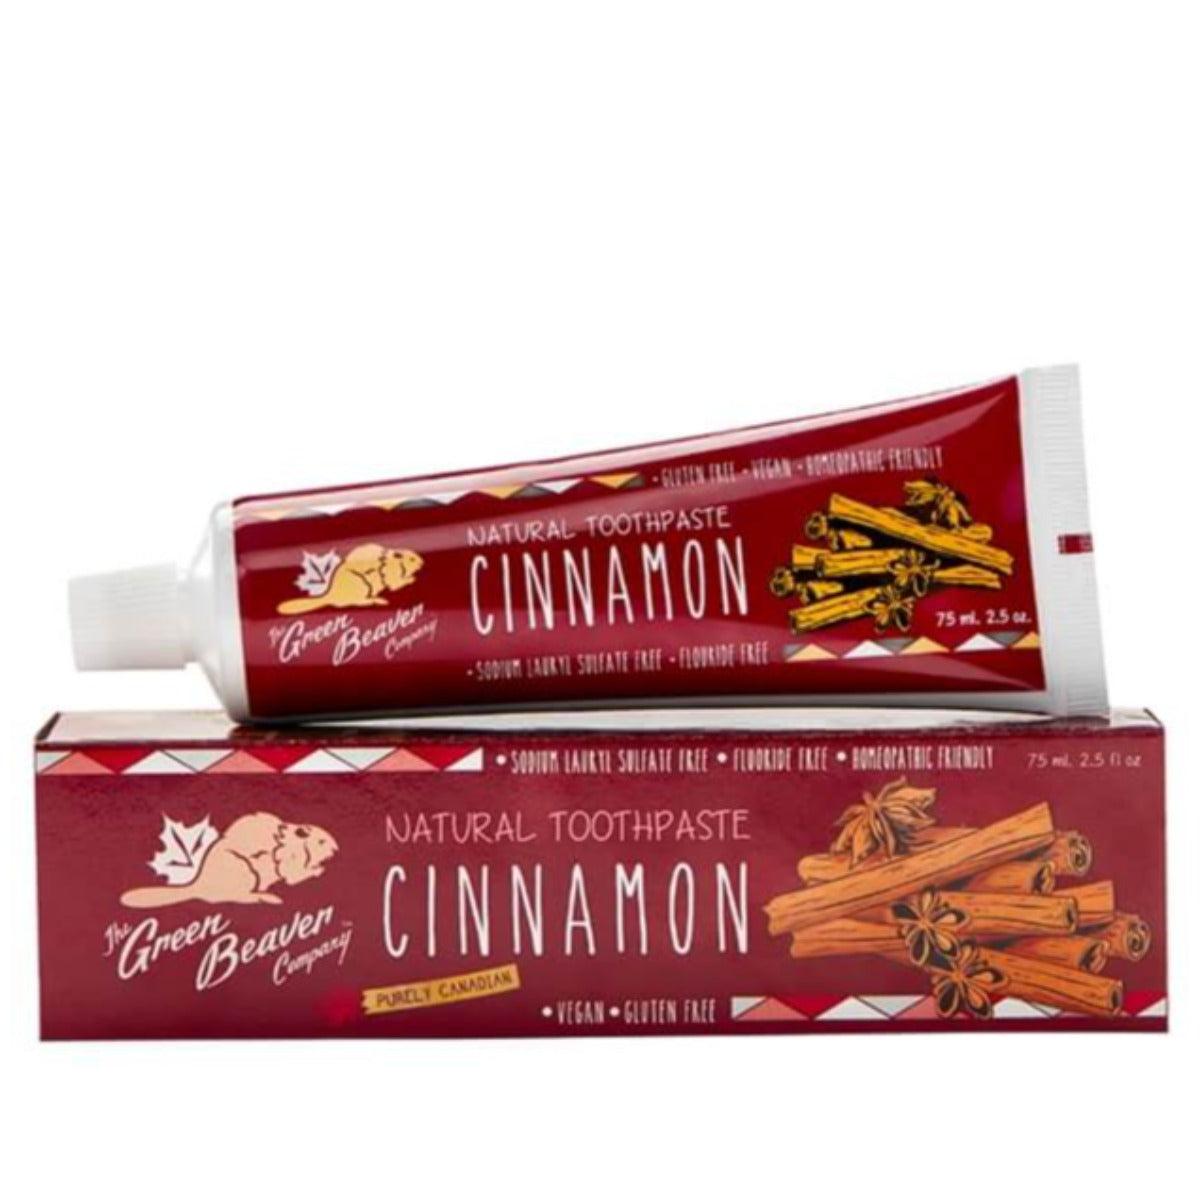 Green Beaver Natural Toothpaste Cinnamon 75mL Toothpaste at Village Vitamin Store